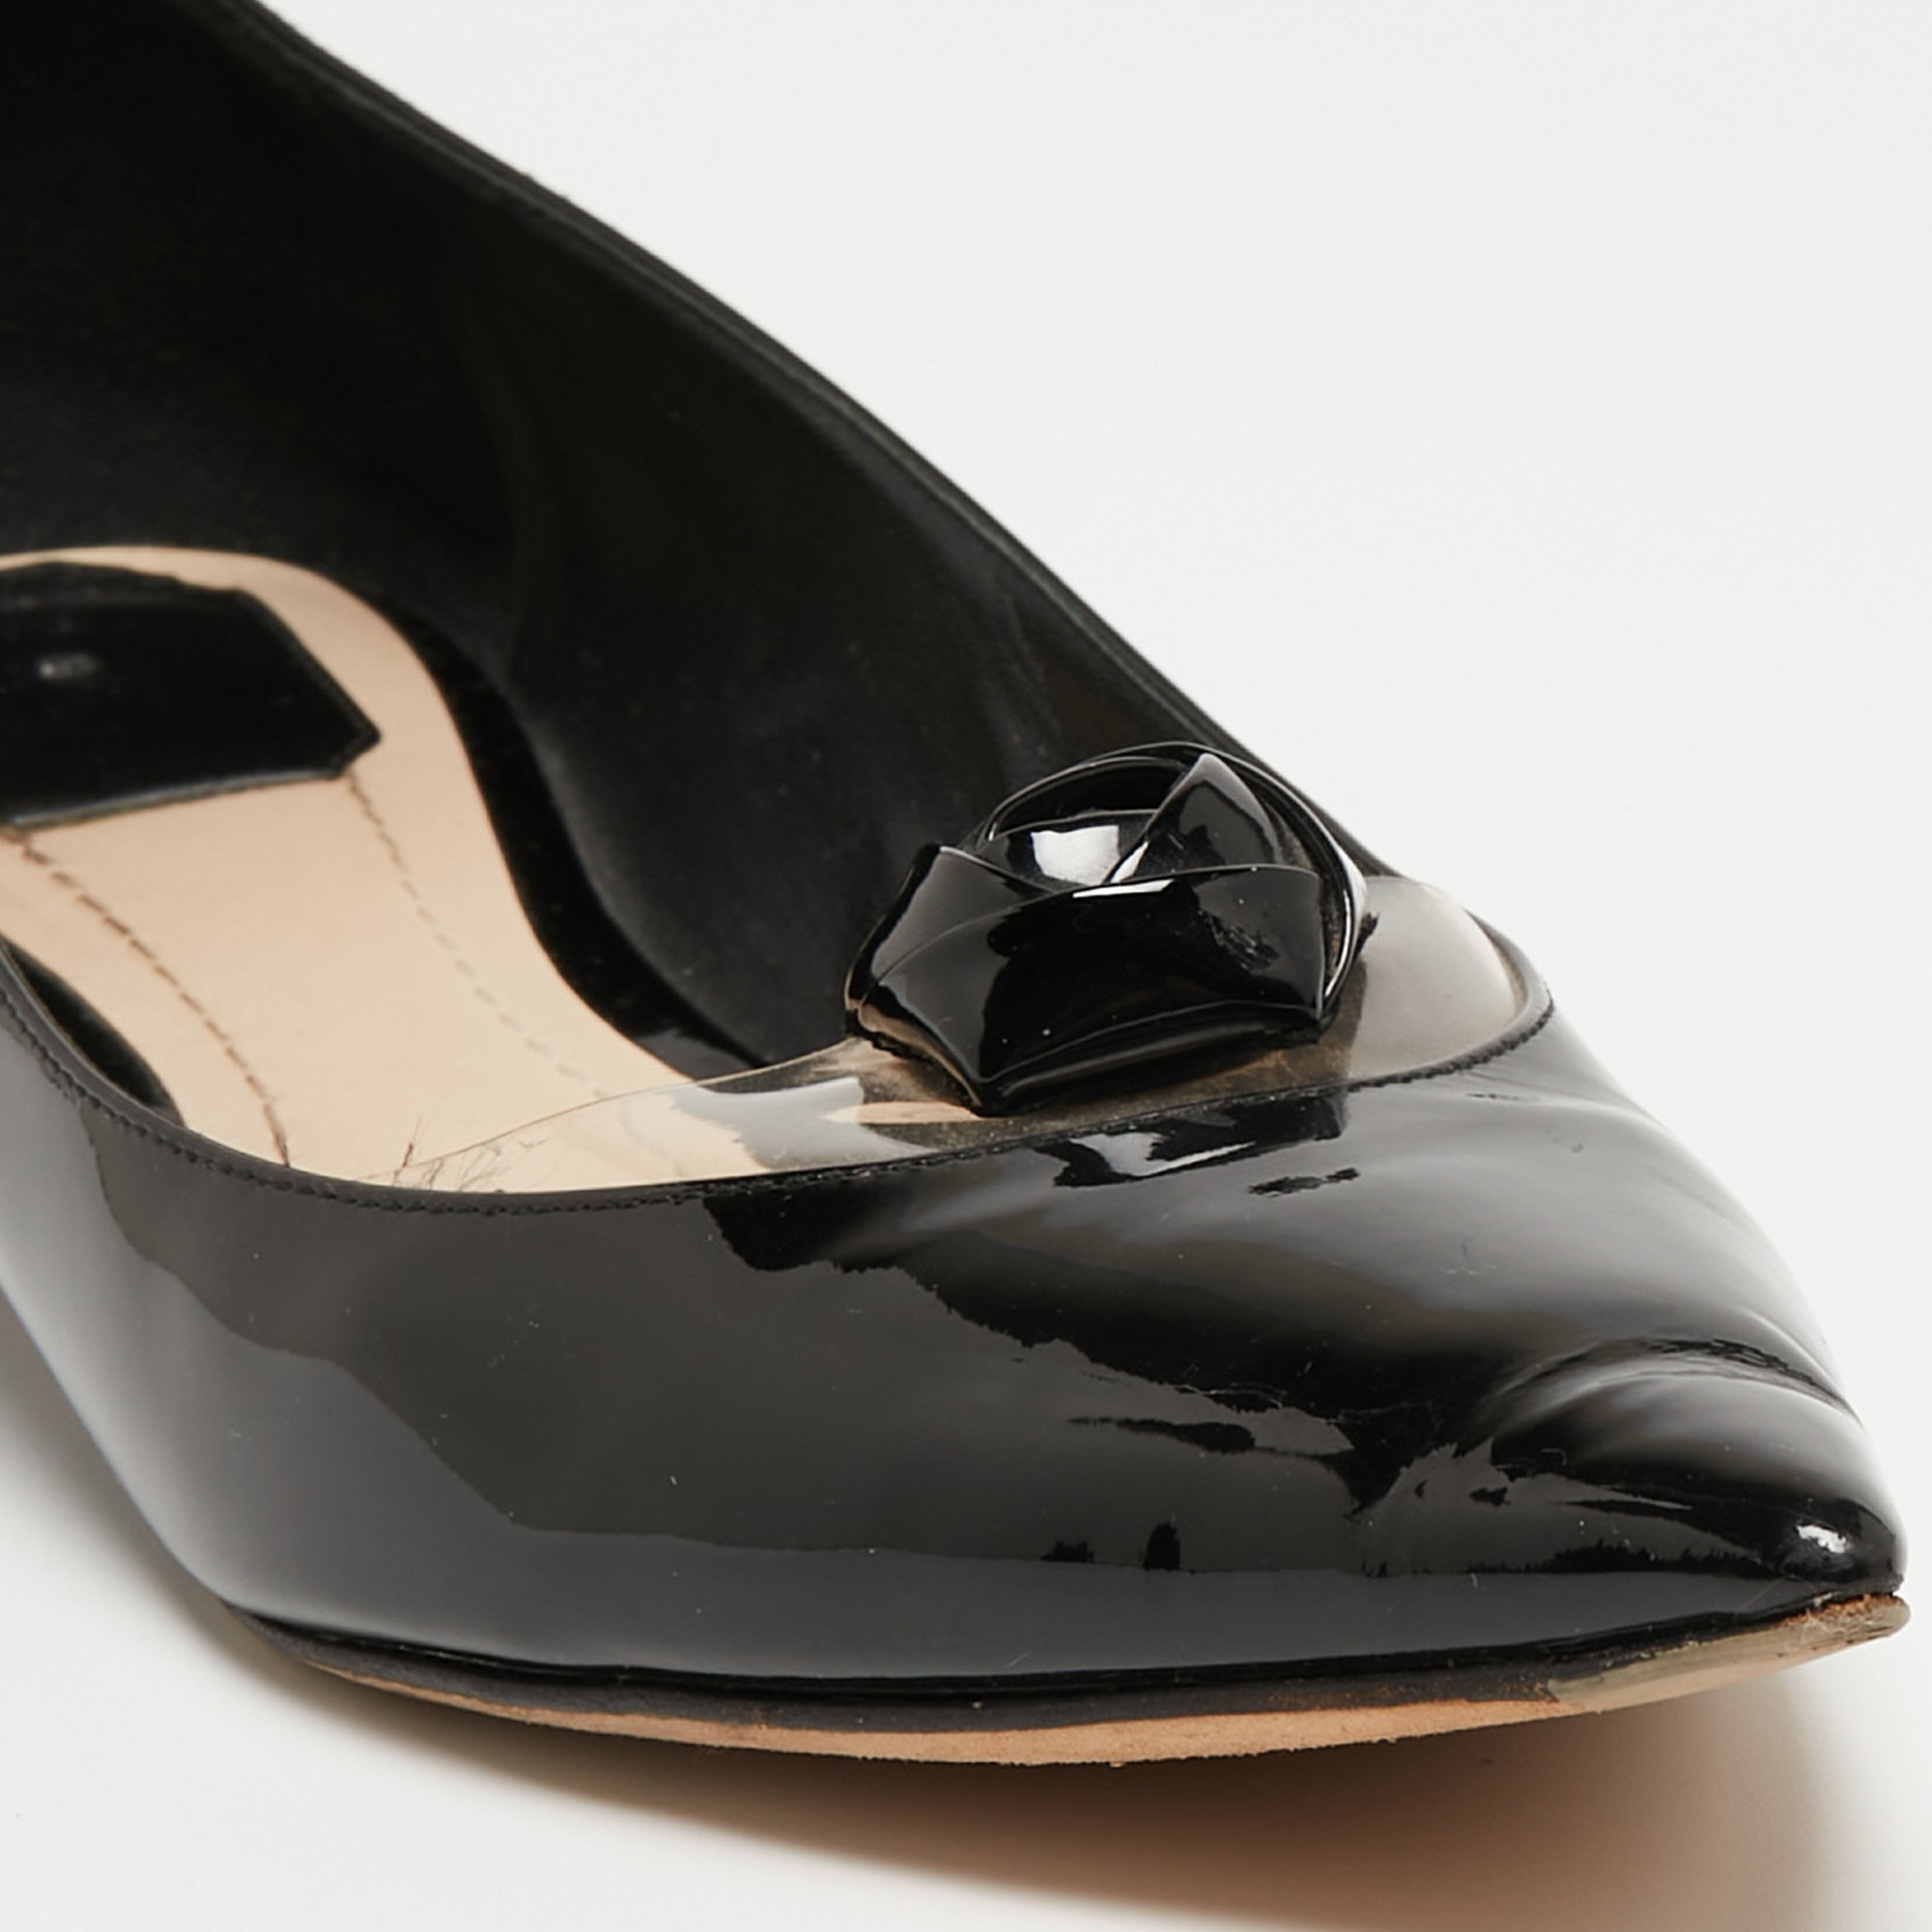 Dior Black Patent Leather And PVC Pointed Toe Ballet Flats Size 40.5